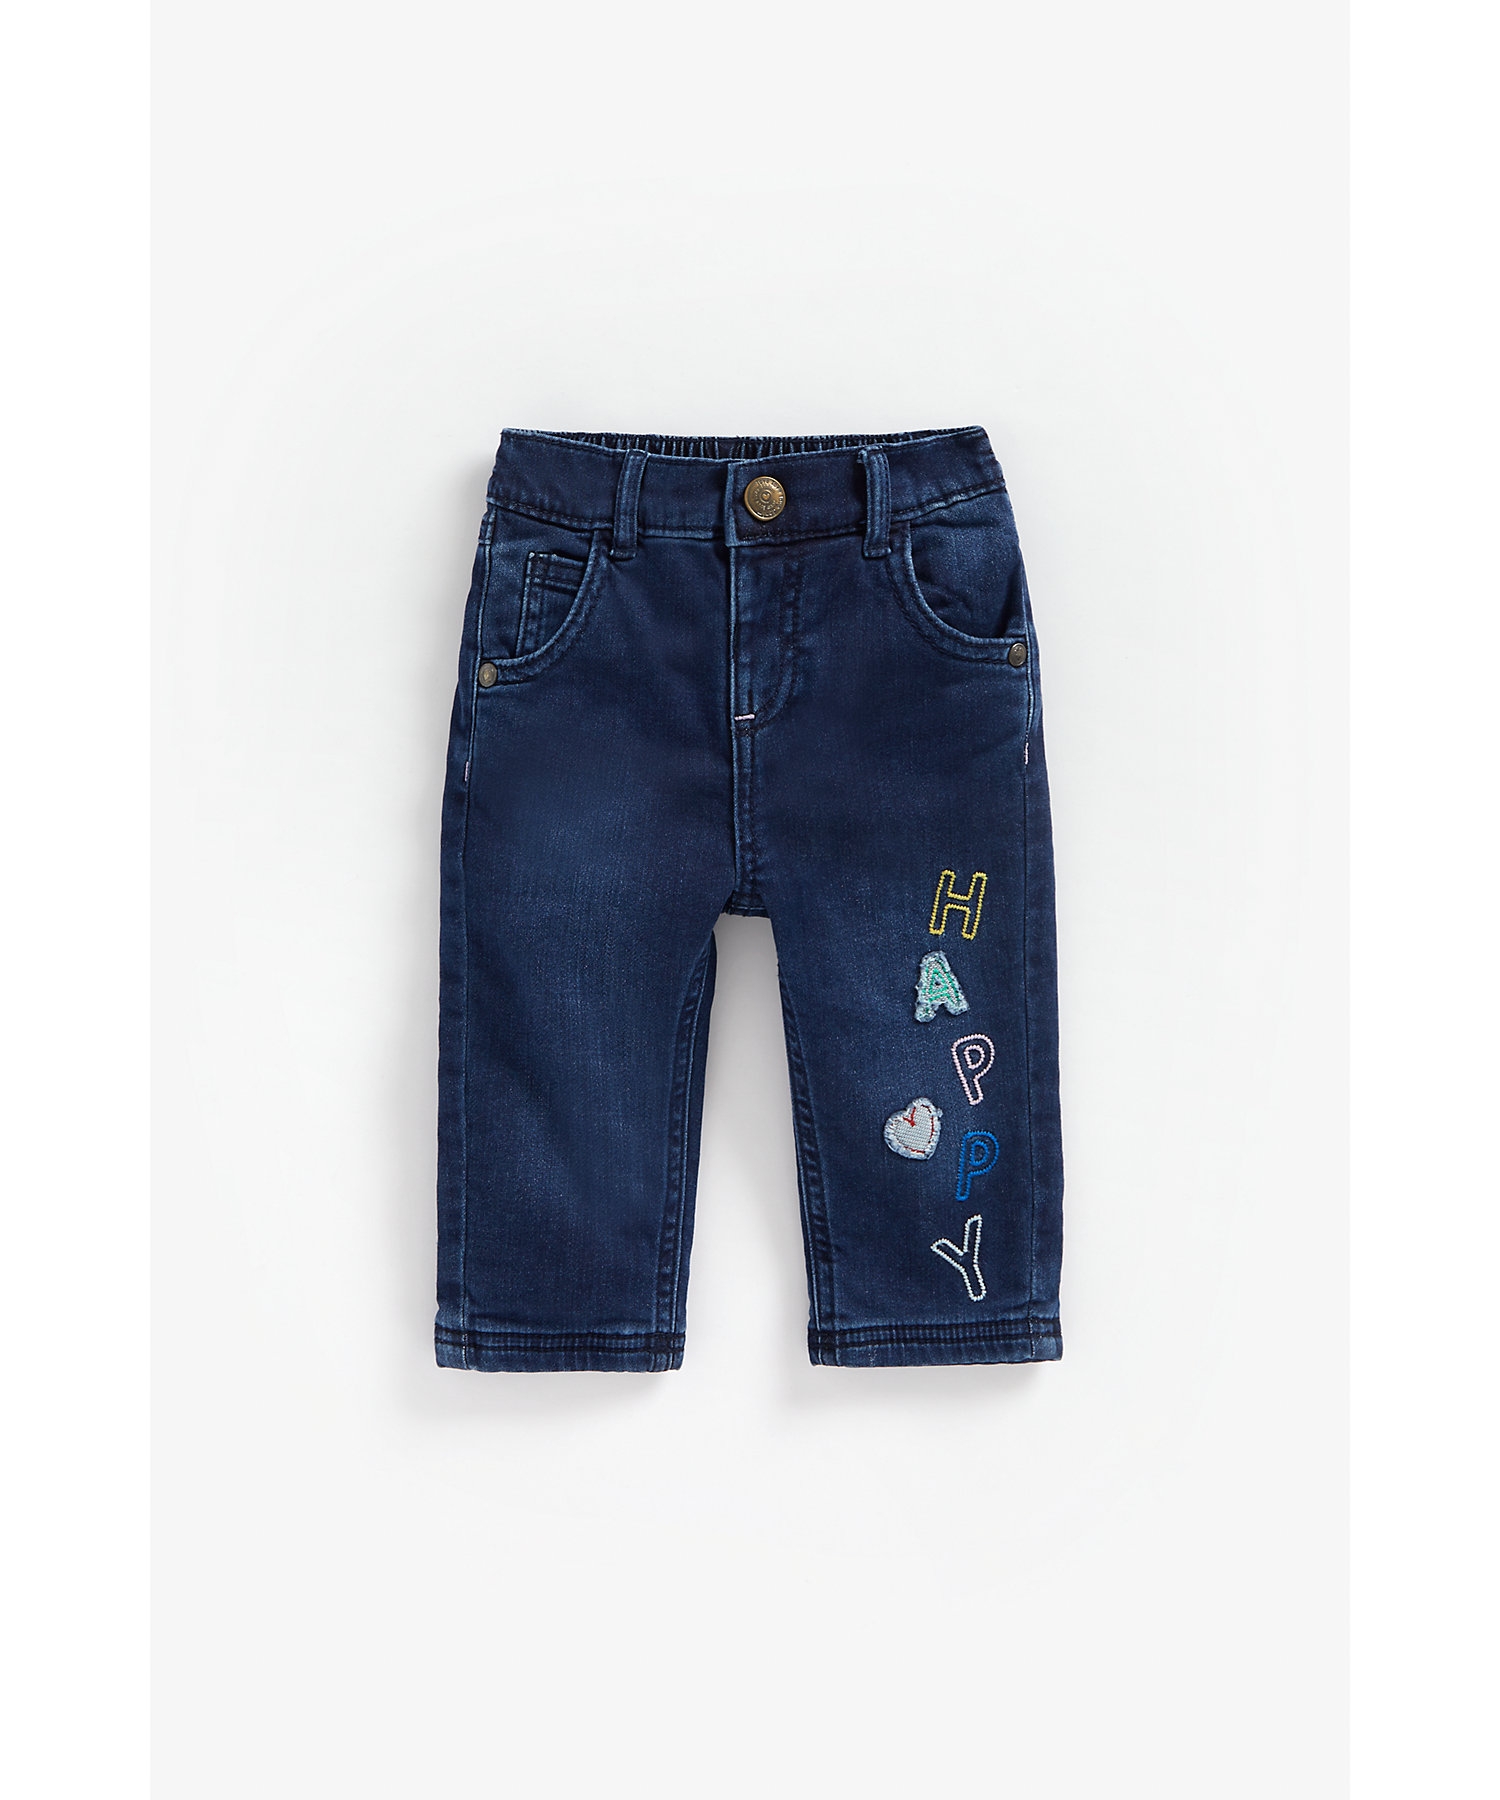 Girls Jeans Text Embroidery - Blue